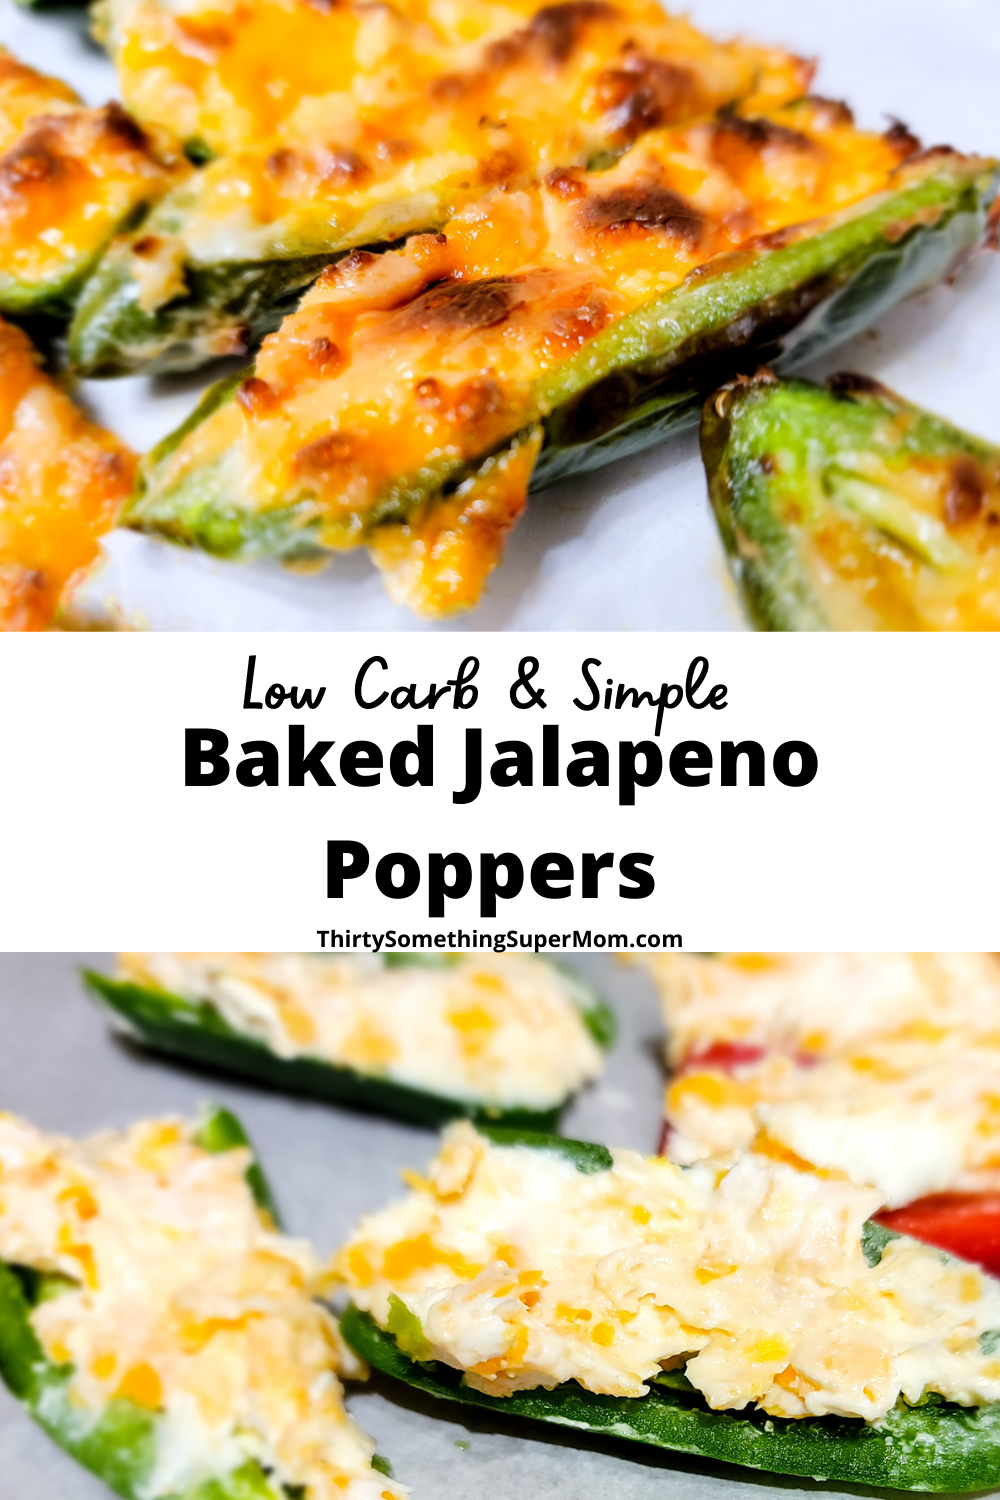 baked jalapeno popper recipes low carb